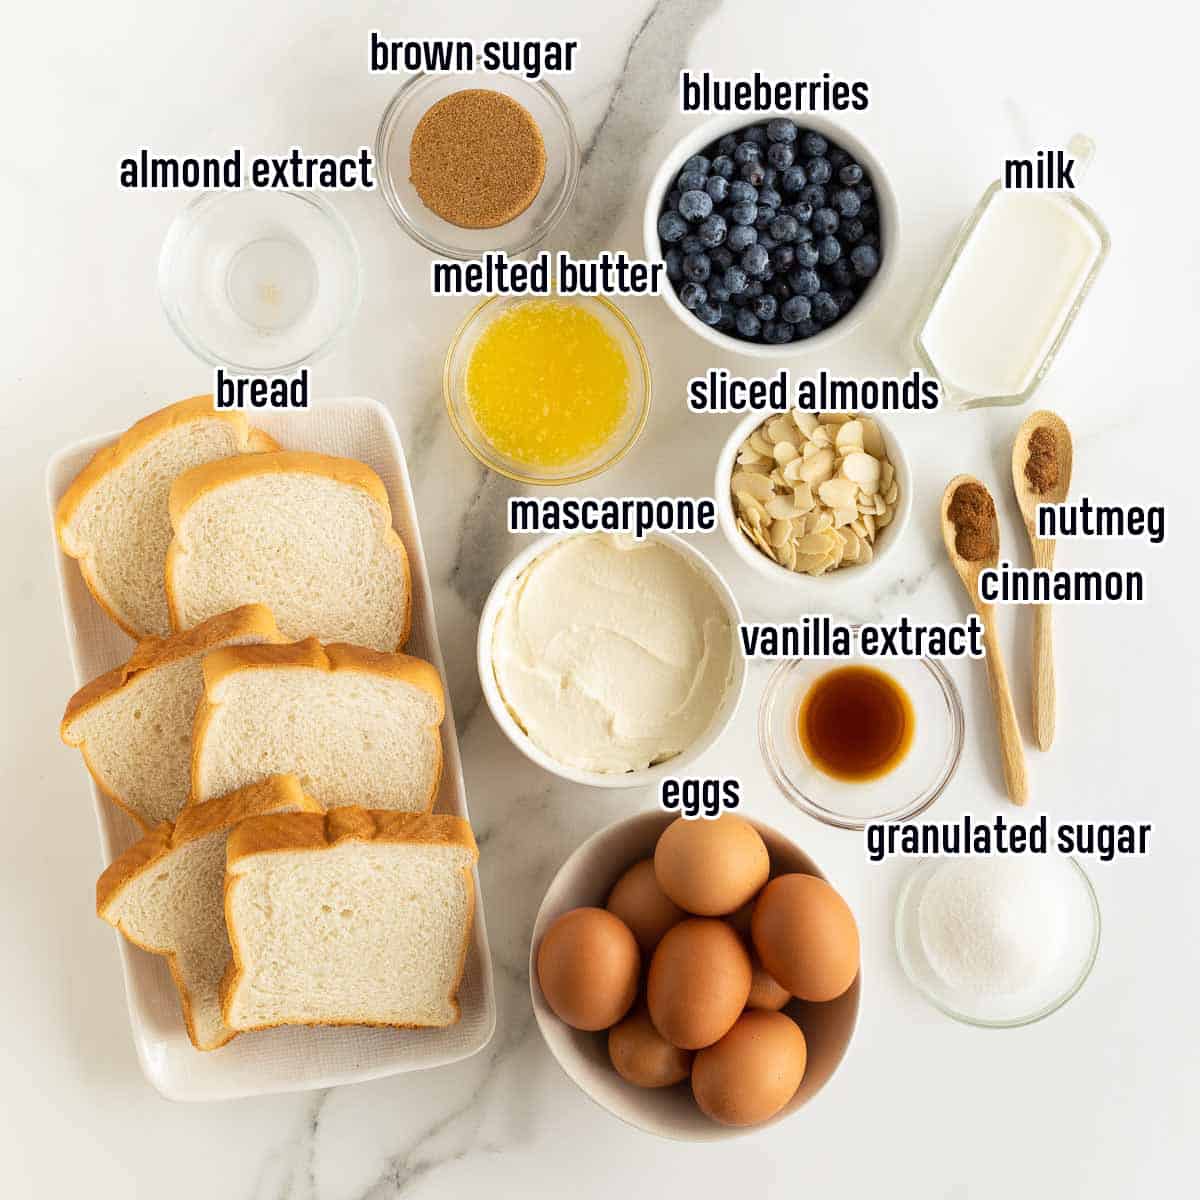 Bread, blueberries, eggs and other ingredients in bowls with text.